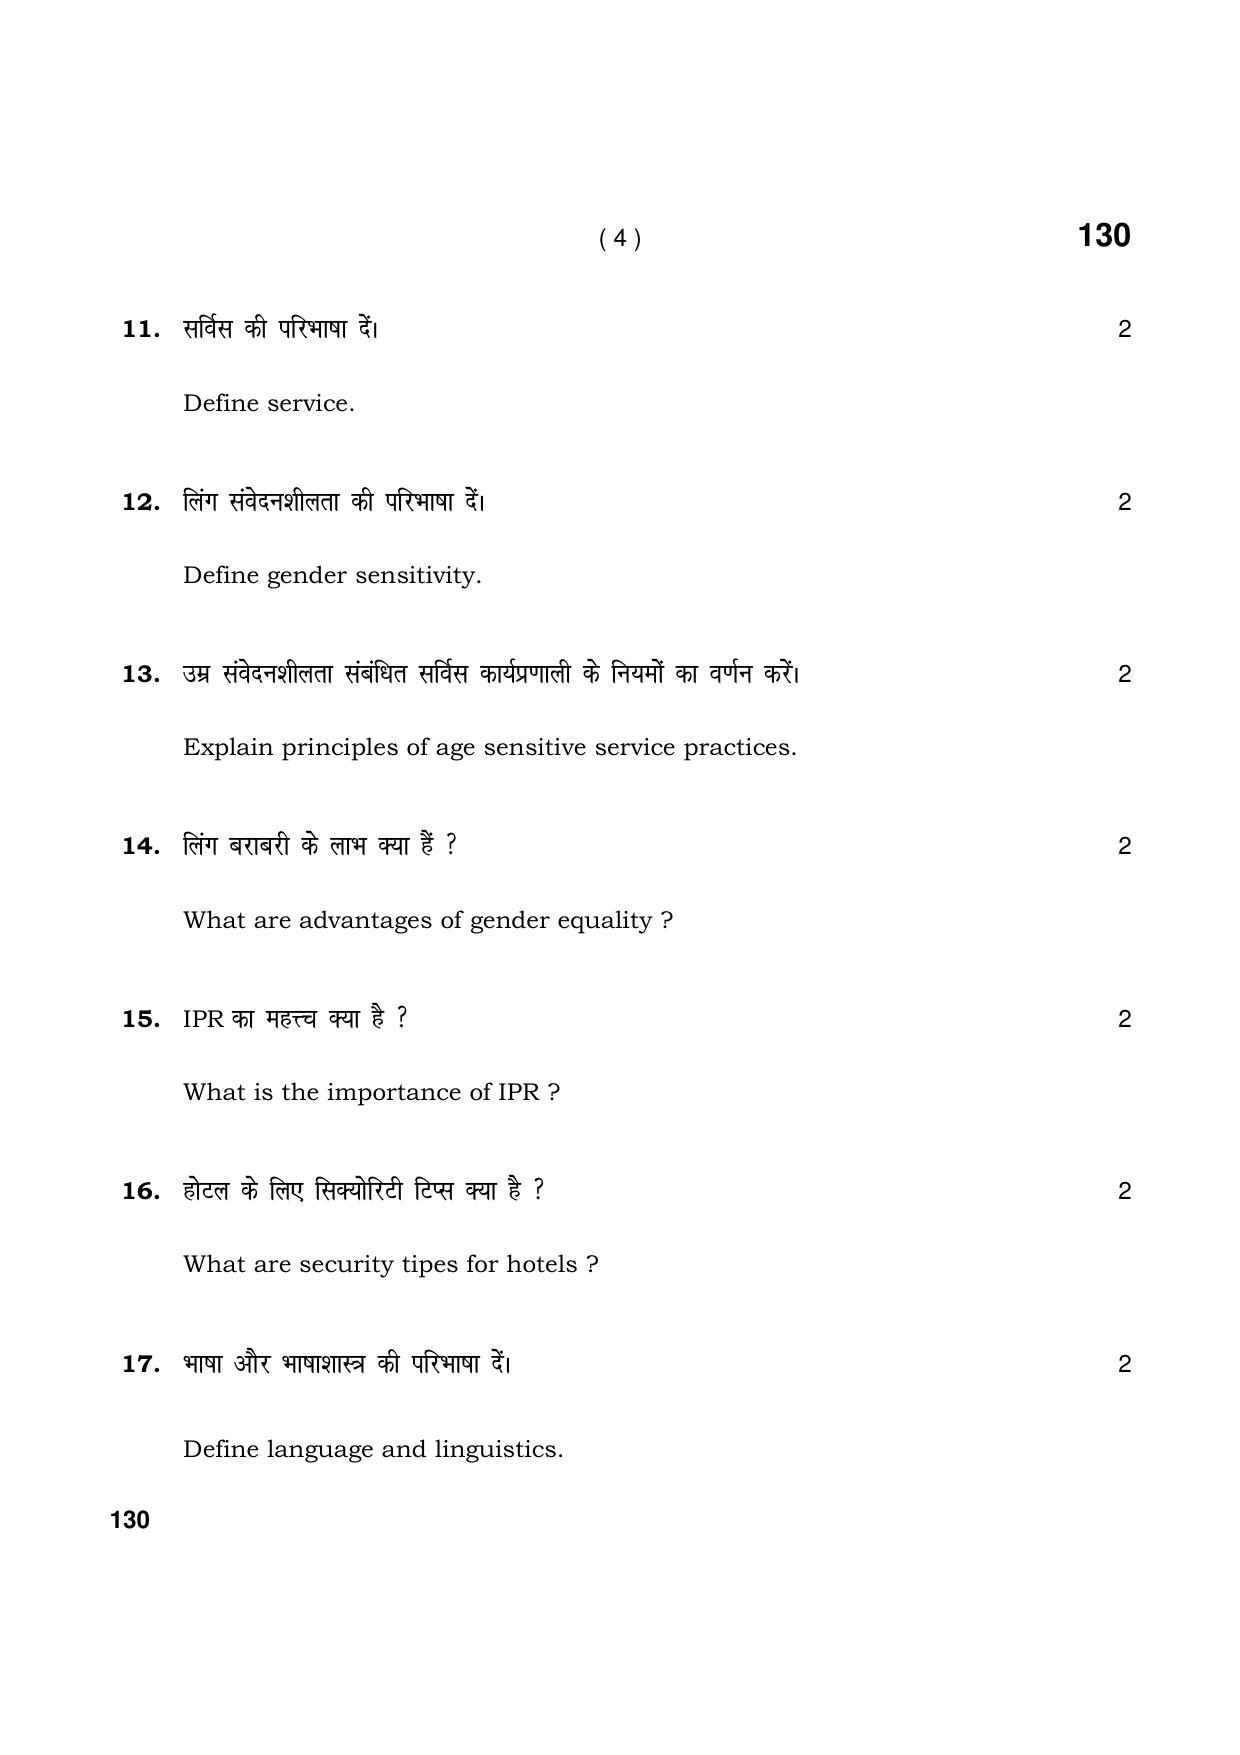 Haryana Board HBSE Class 10 Tourism-Hospitality 2021 Question Paper - Page 4